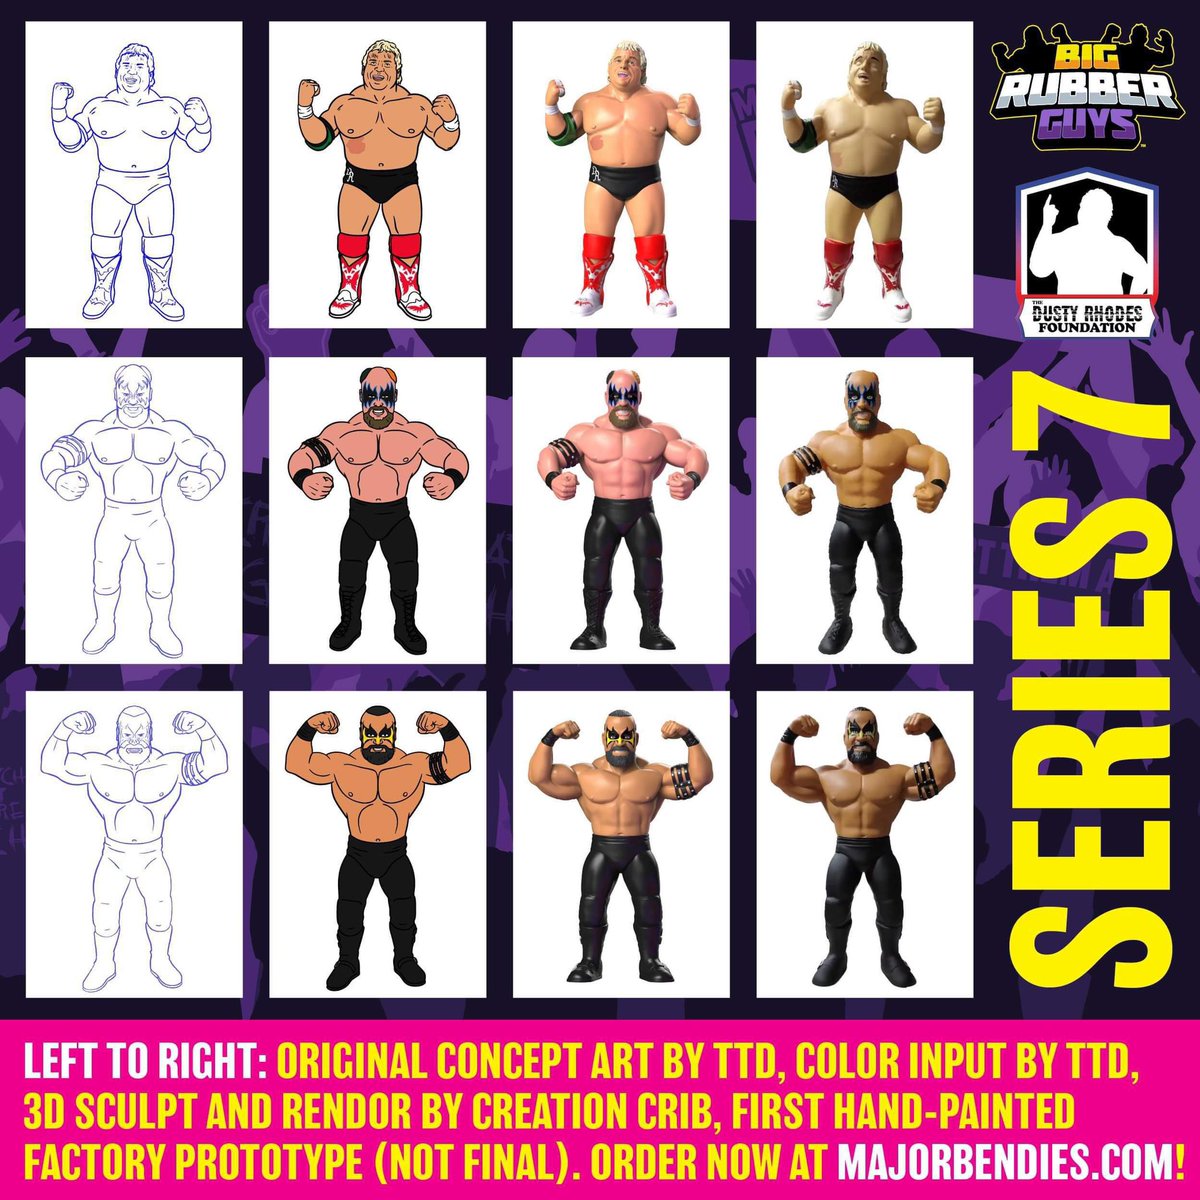 Big Rubber Guys Series 7 progress! From the original sketches in March, to the first hand-painted factory prototypes in April!

Order yours at MajorBendies.com now!

#ScratchThatFigureItch